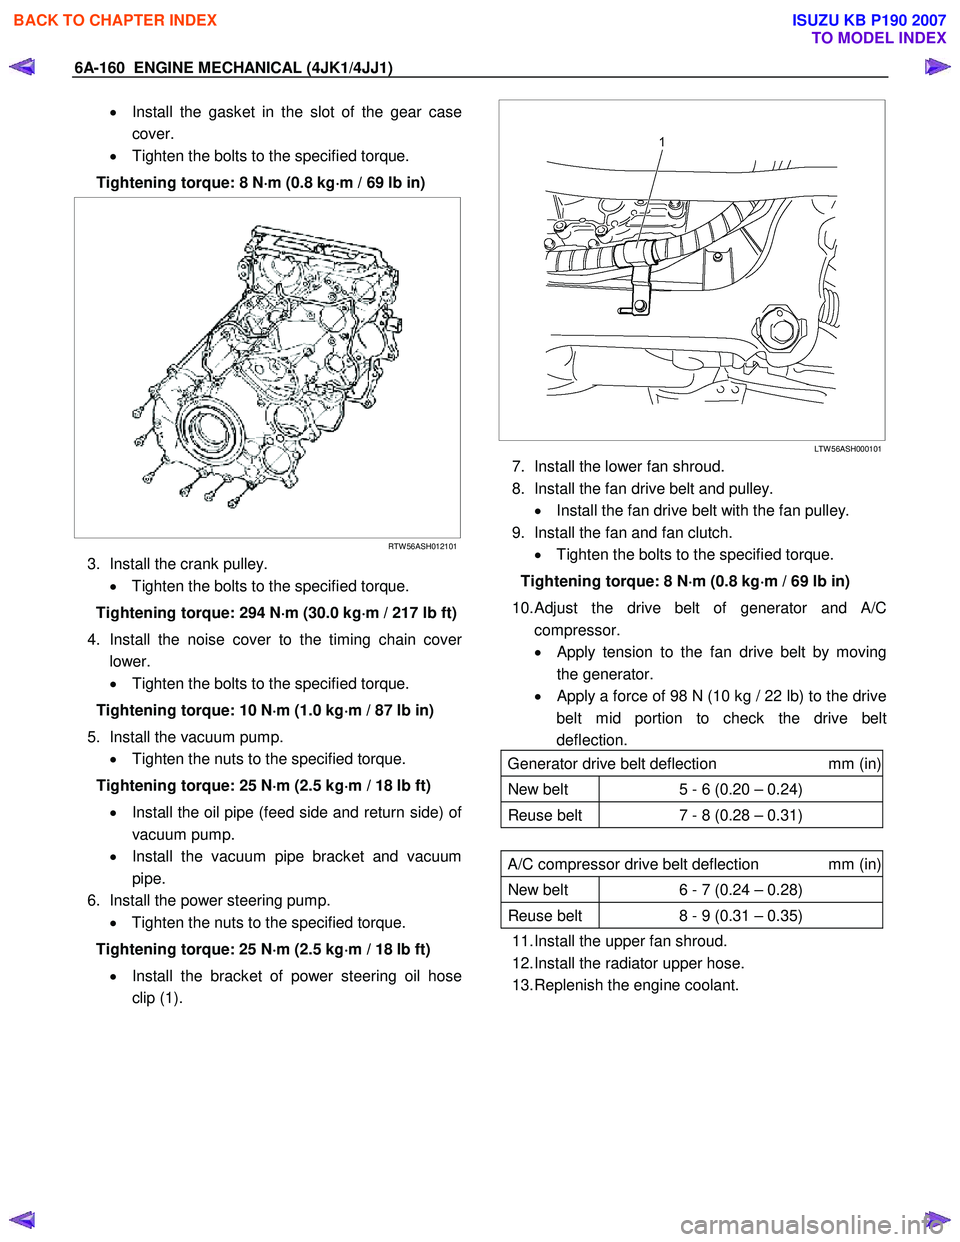 ISUZU KB P190 2007  Workshop Repair Manual 6A-160  ENGINE MECHANICAL (4JK1/4JJ1) 
•  Install the gasket in the slot of the gear case
cover. 
•   Tighten the bolts to the specified torque. 
Tightening torque: 8 N ⋅
⋅⋅ 
⋅
m (0.8 kg �